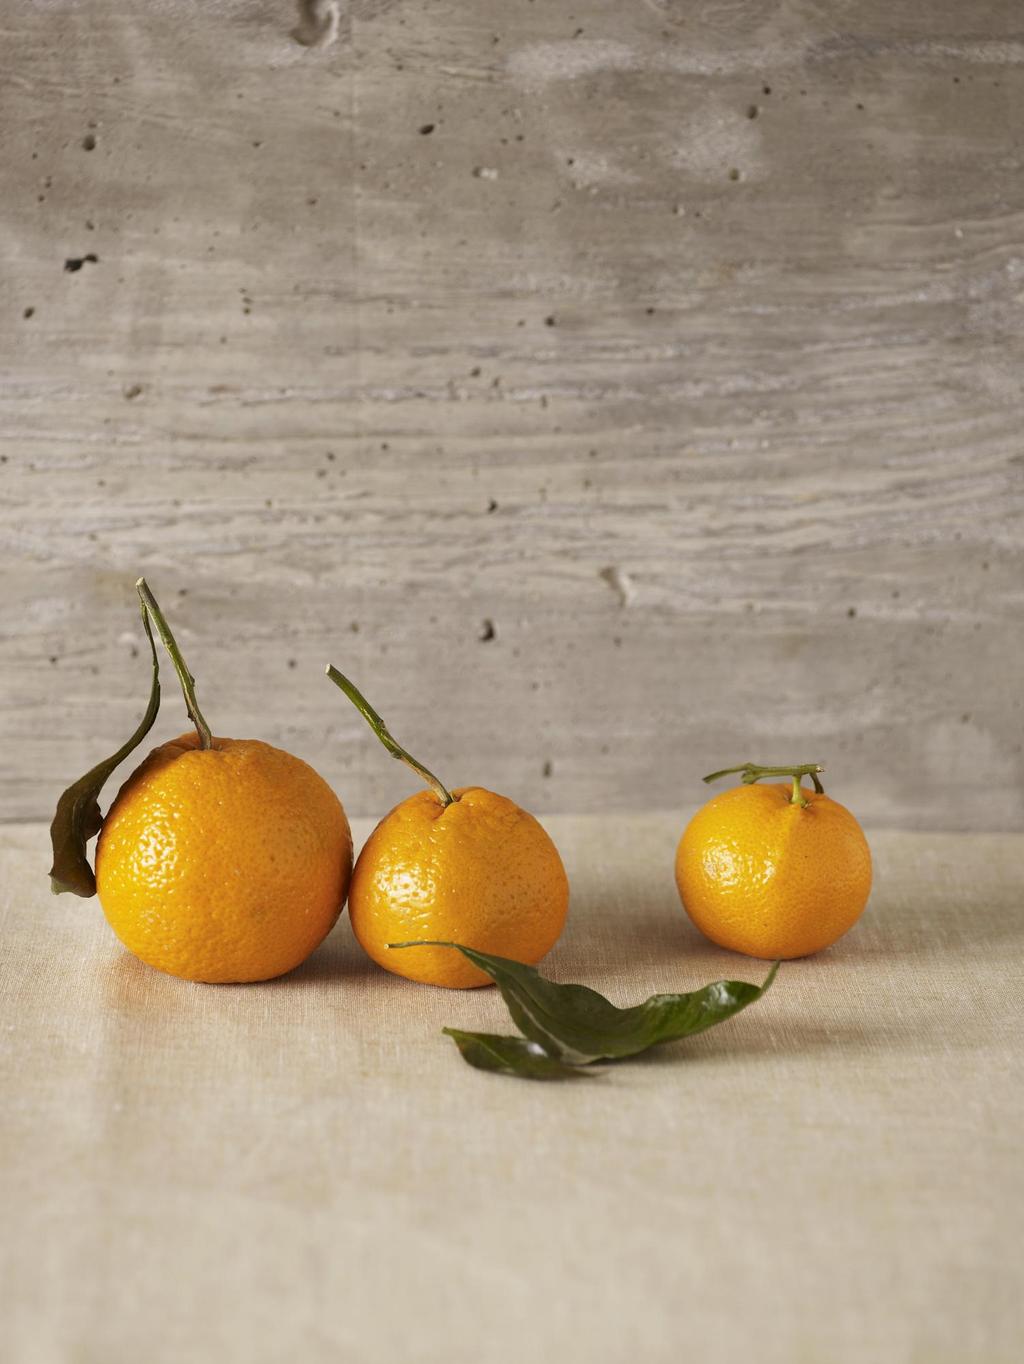 The smell of citrus is guaranteed to wake up your senses and lift up your mood especially on a cold winter day.